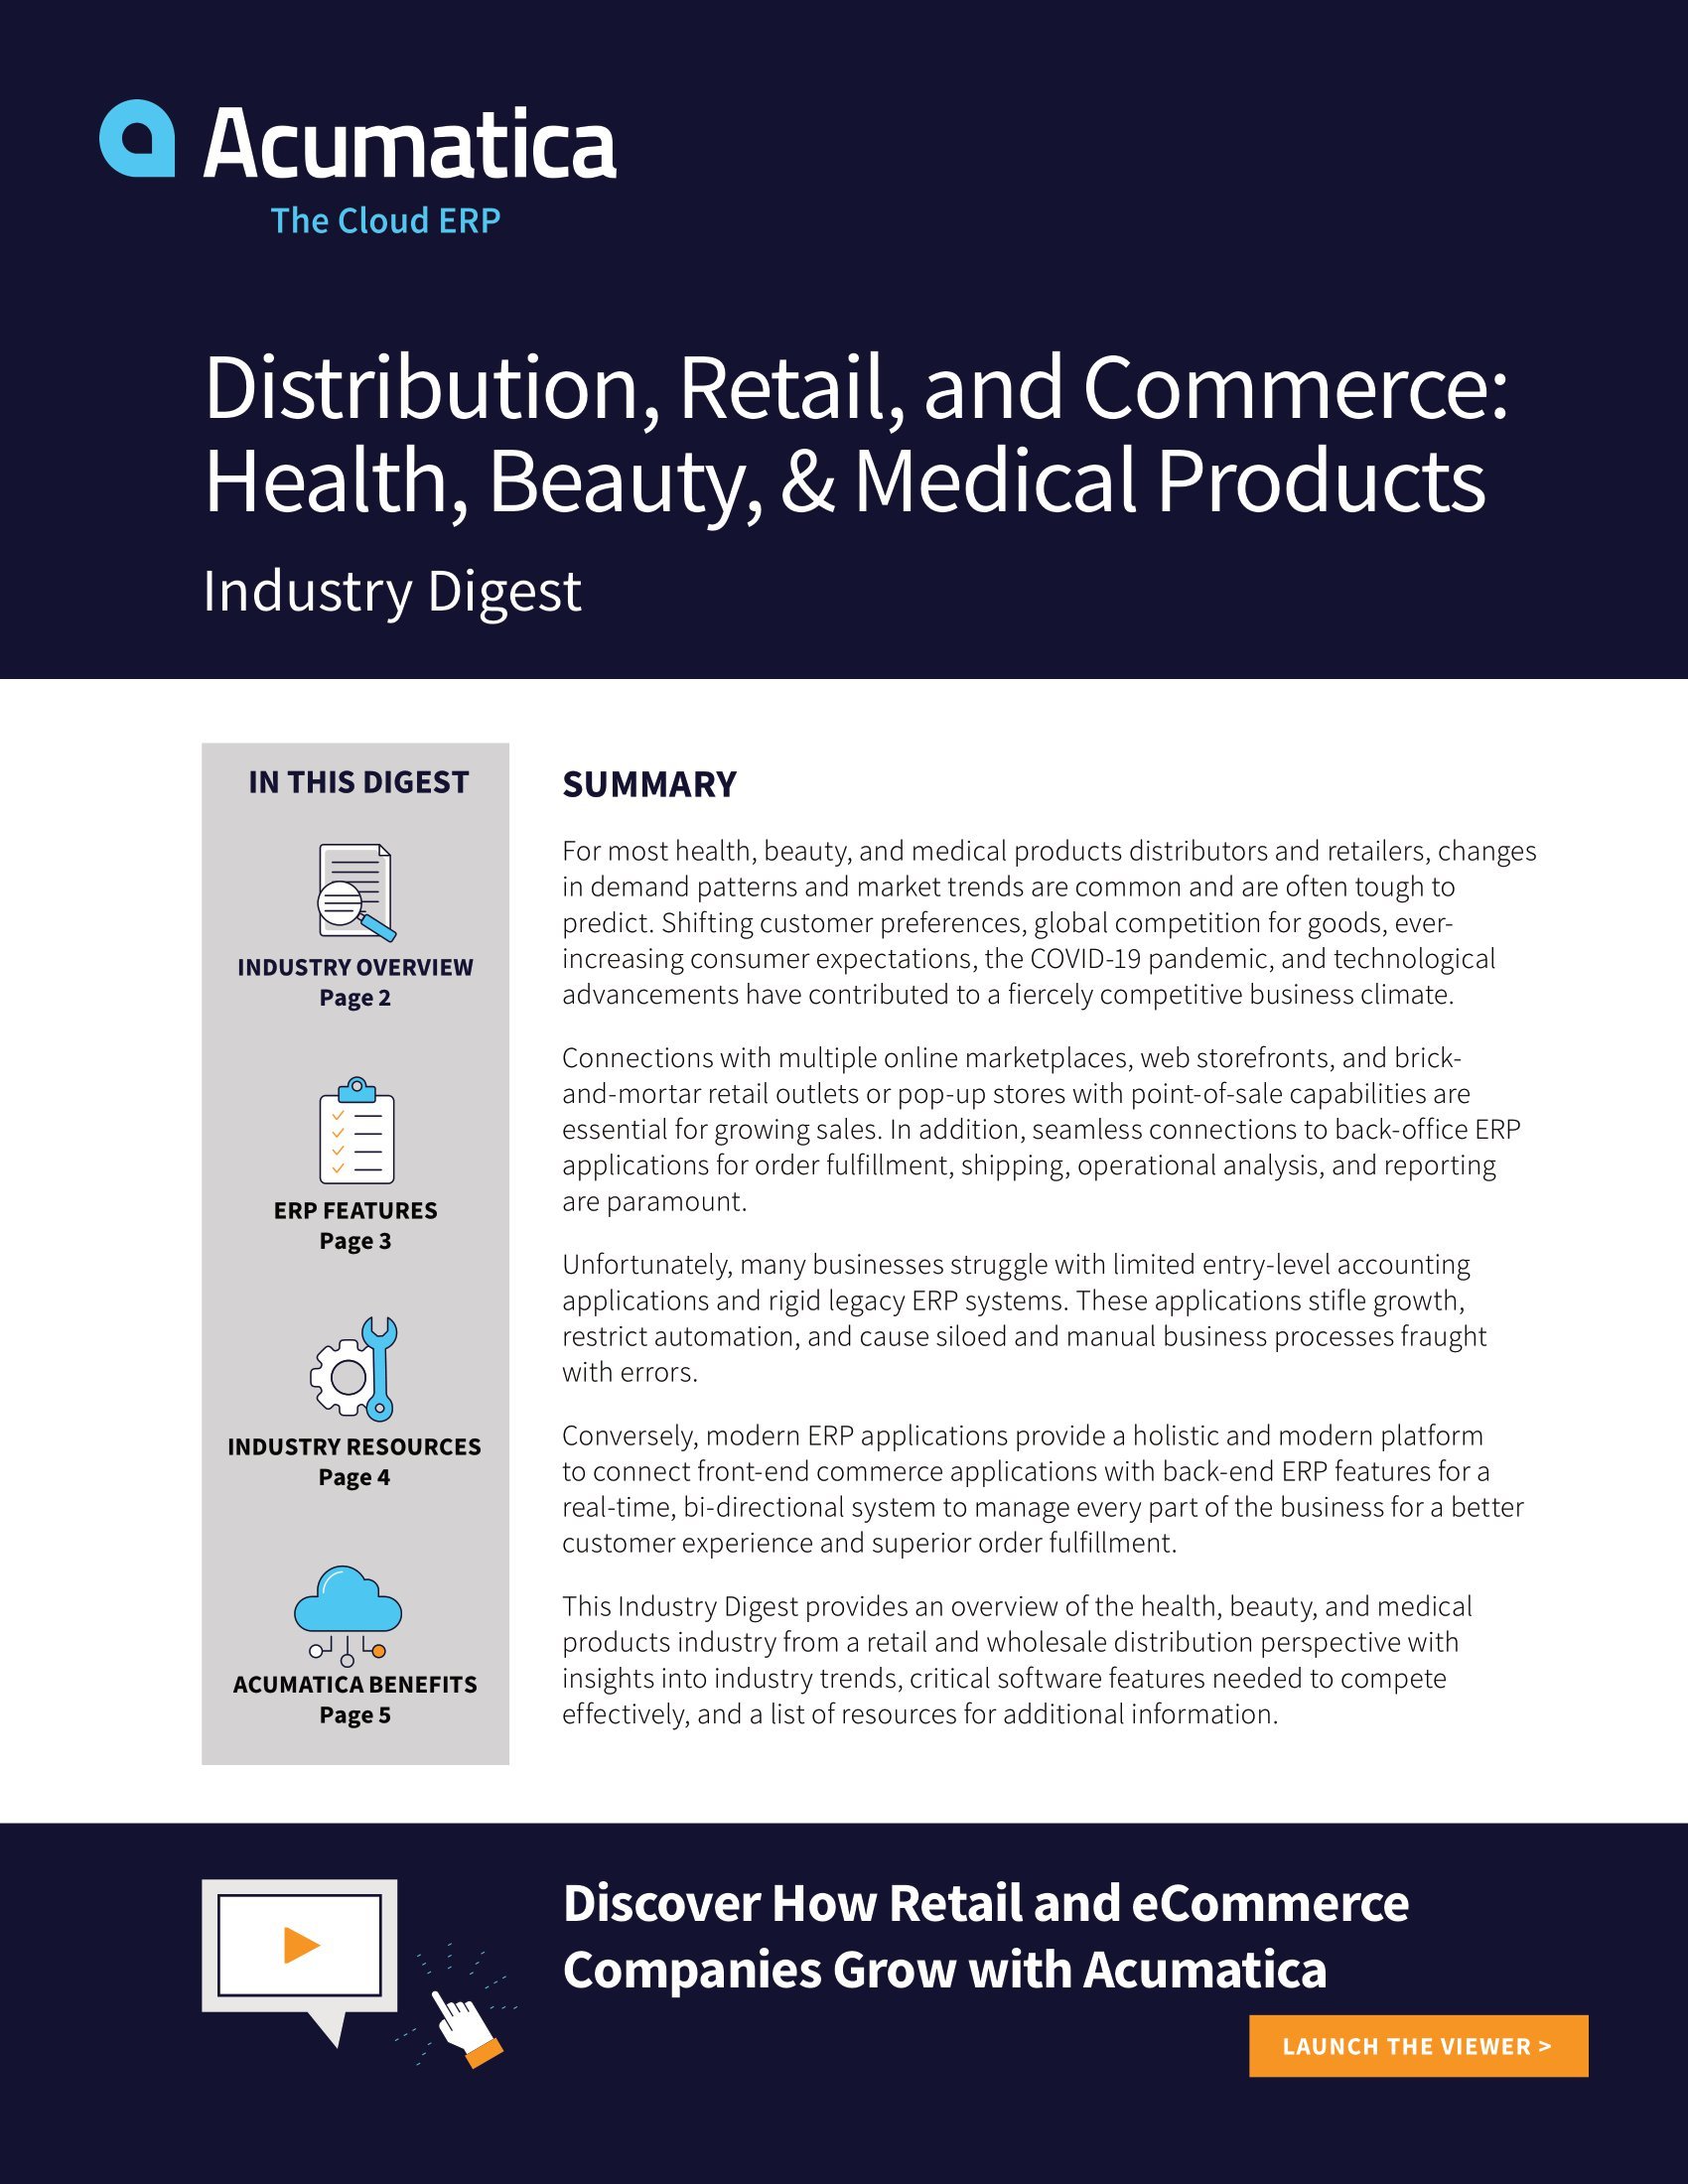 Health, Beauty, and Medical Products Distributors and Retailers: Attract and Keep Customers For Life With a Modern ERP Application